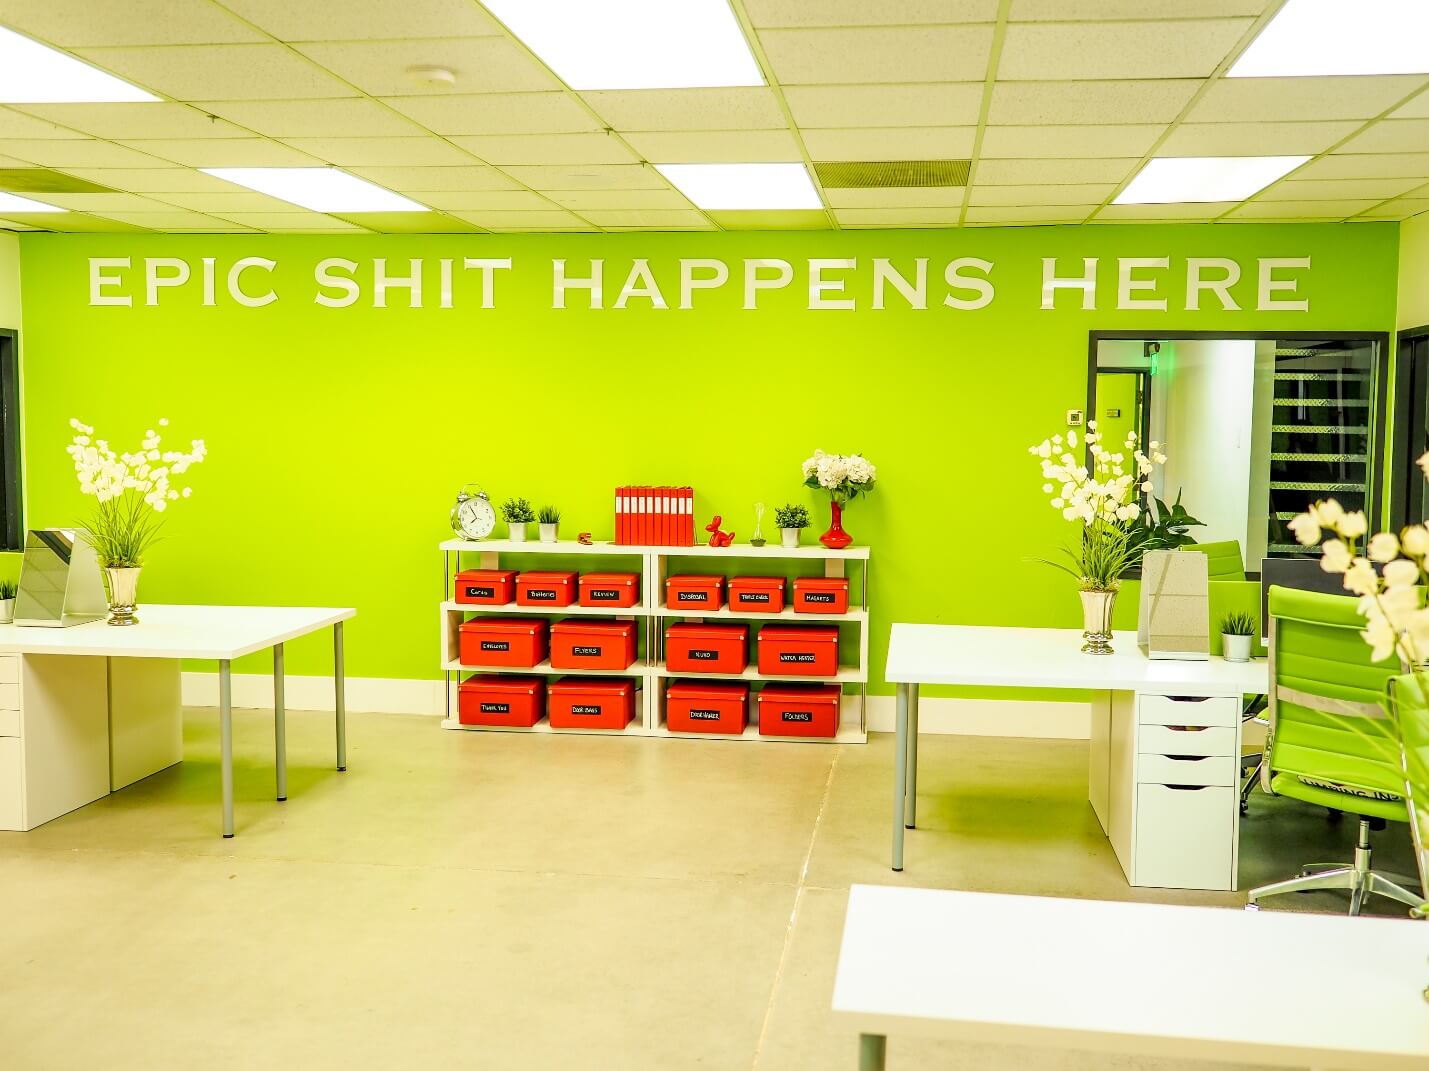 Image of dispatch office with the saying "epic shit happens here" shown on wall